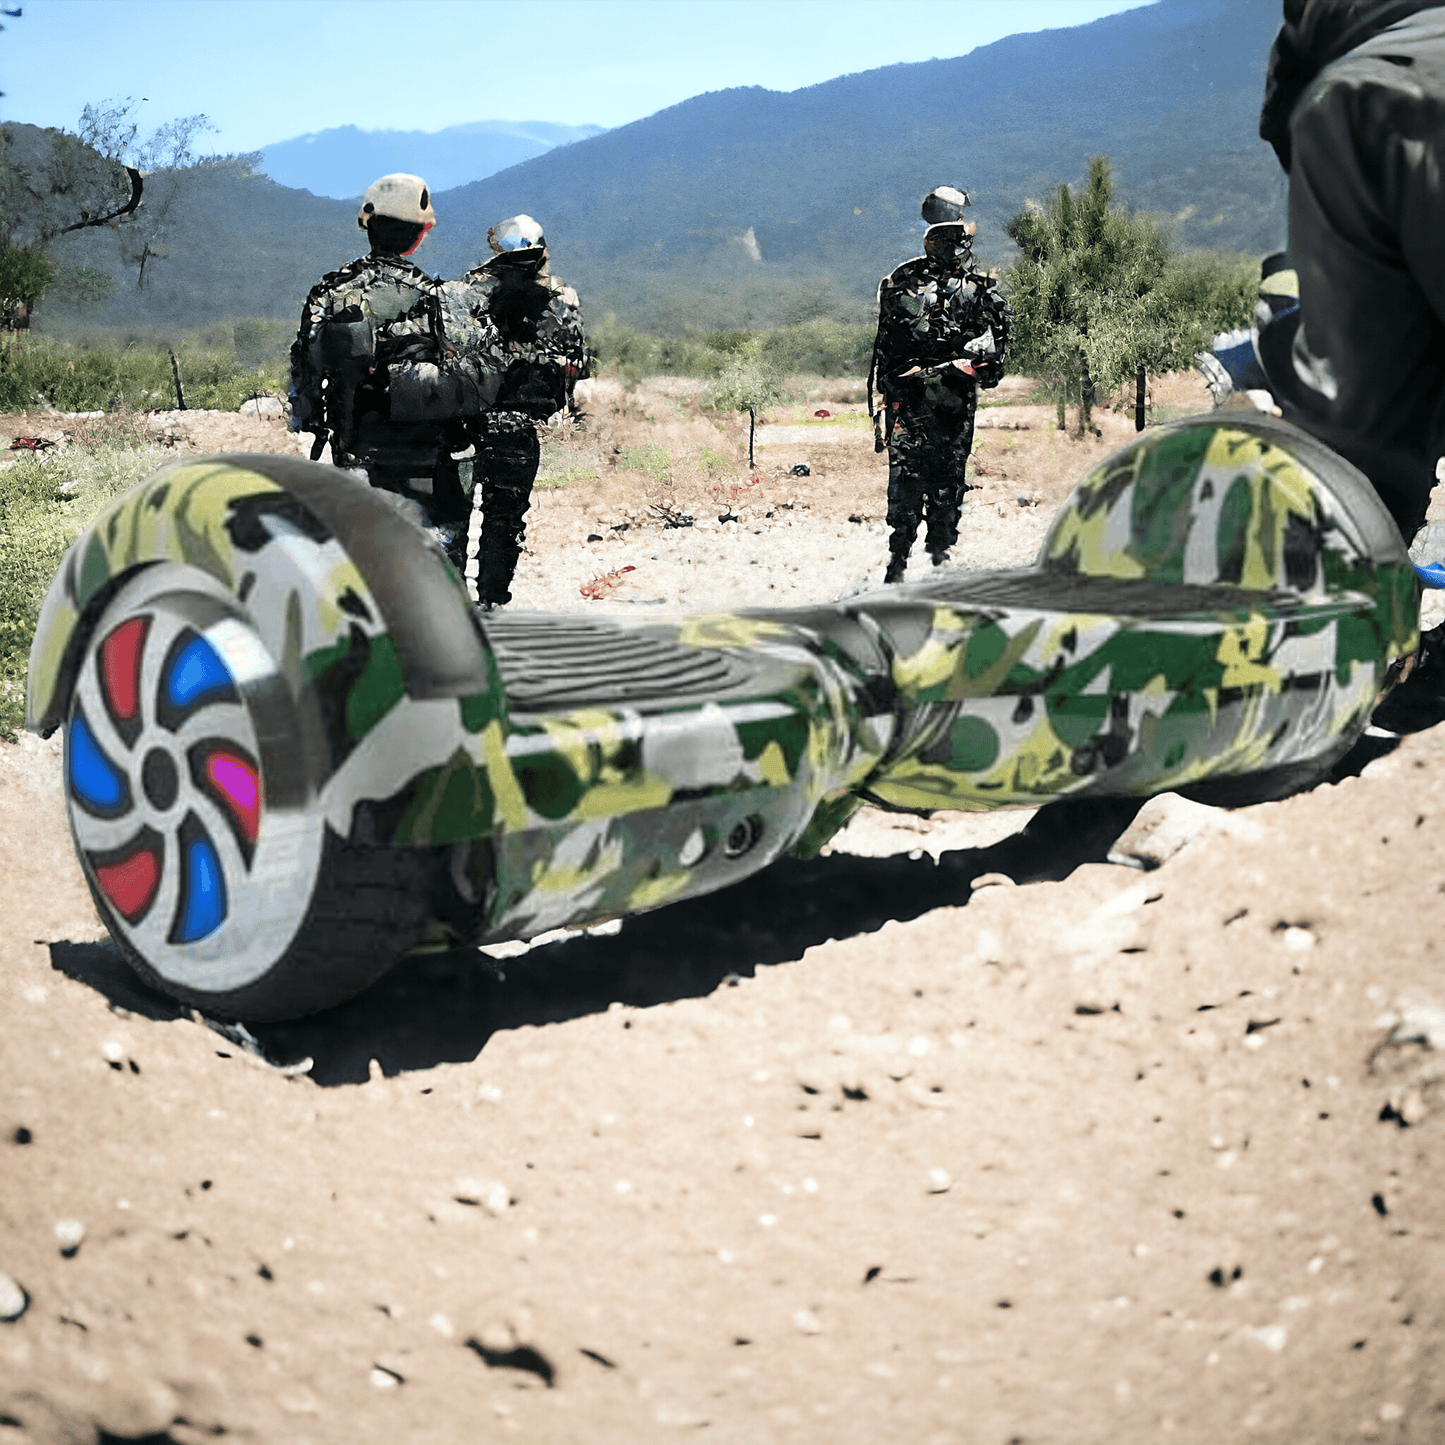 PATOYS | H6+ Green Military Hoverboard balancing wheel with Remote, Bag and Long Range Battery hoverboard PATOYS